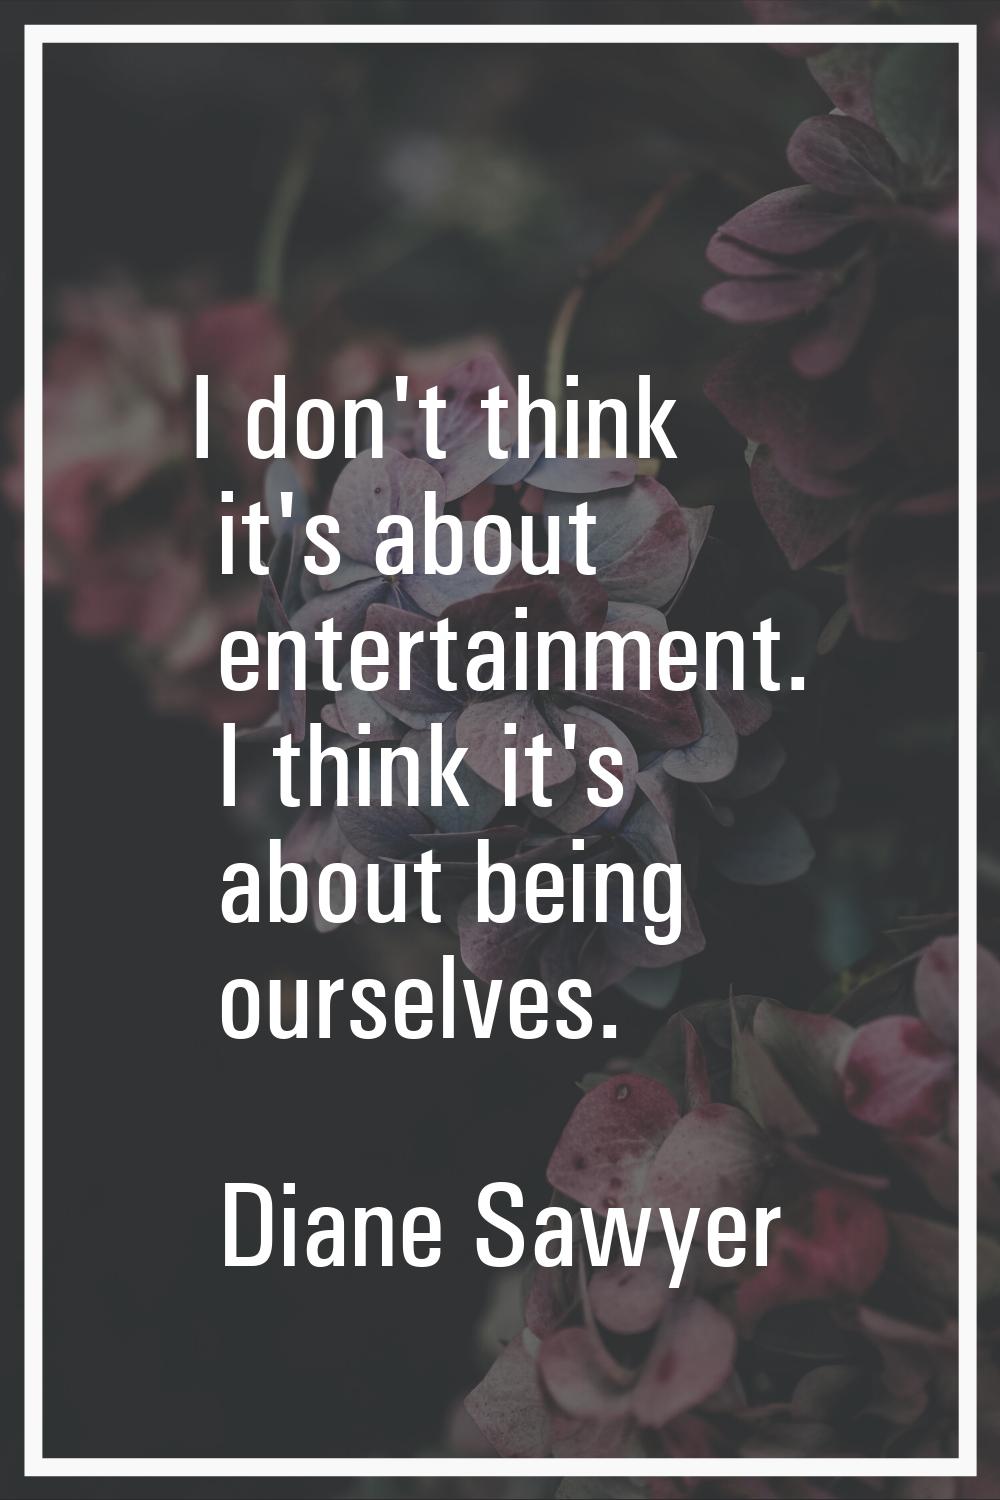 I don't think it's about entertainment. I think it's about being ourselves.